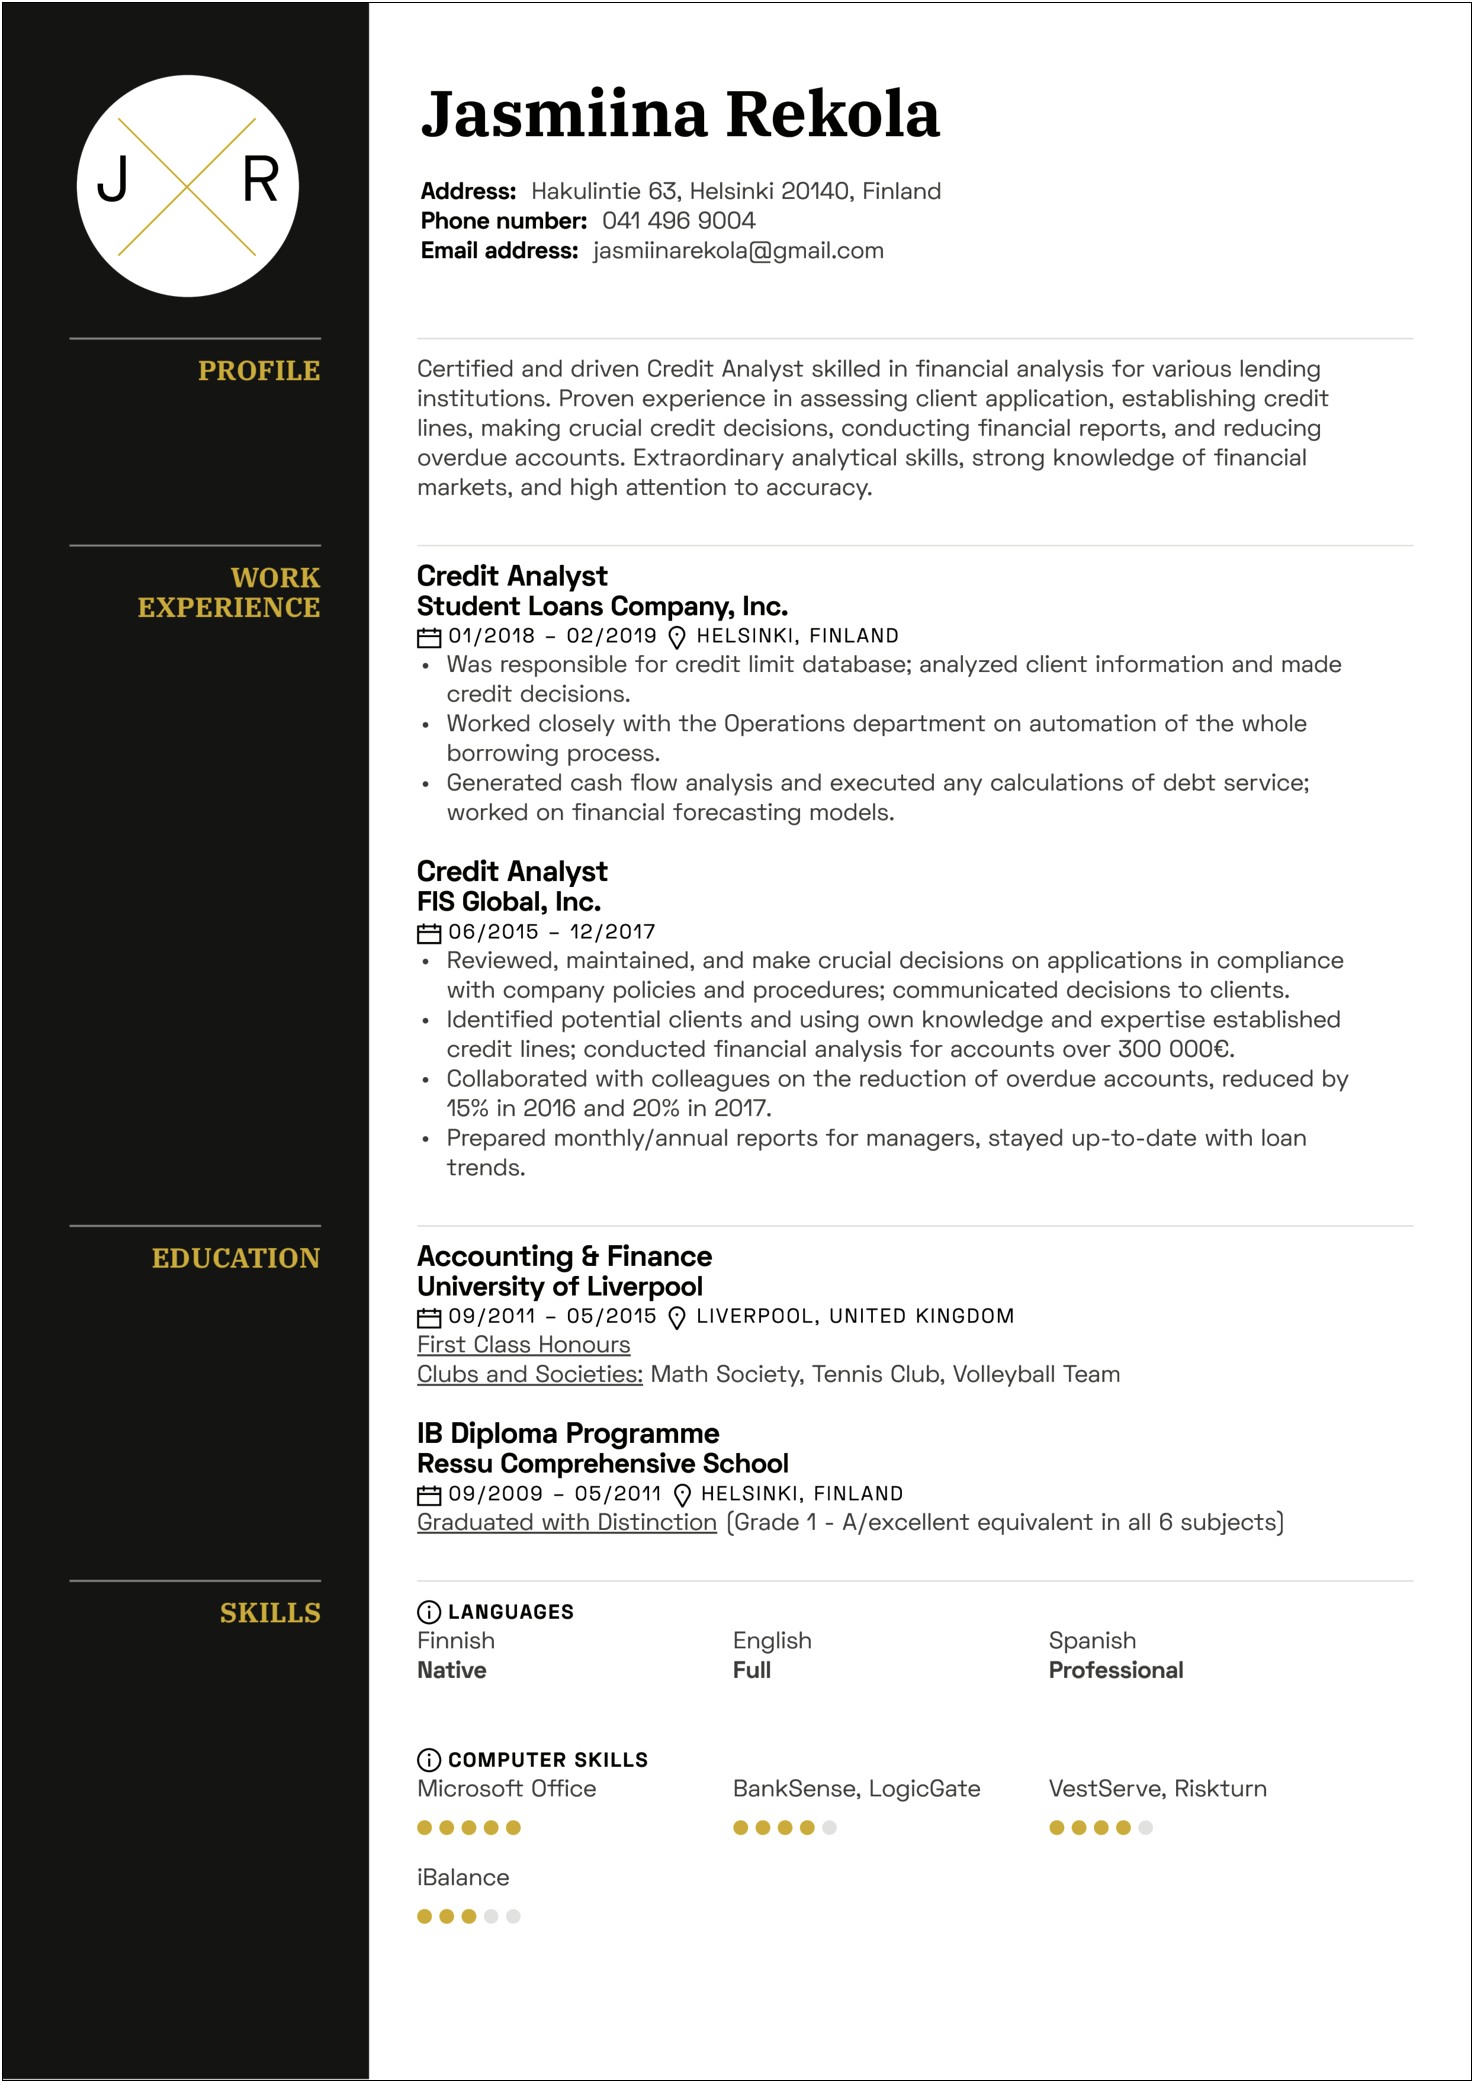 Resume Description Examples For A Credit An